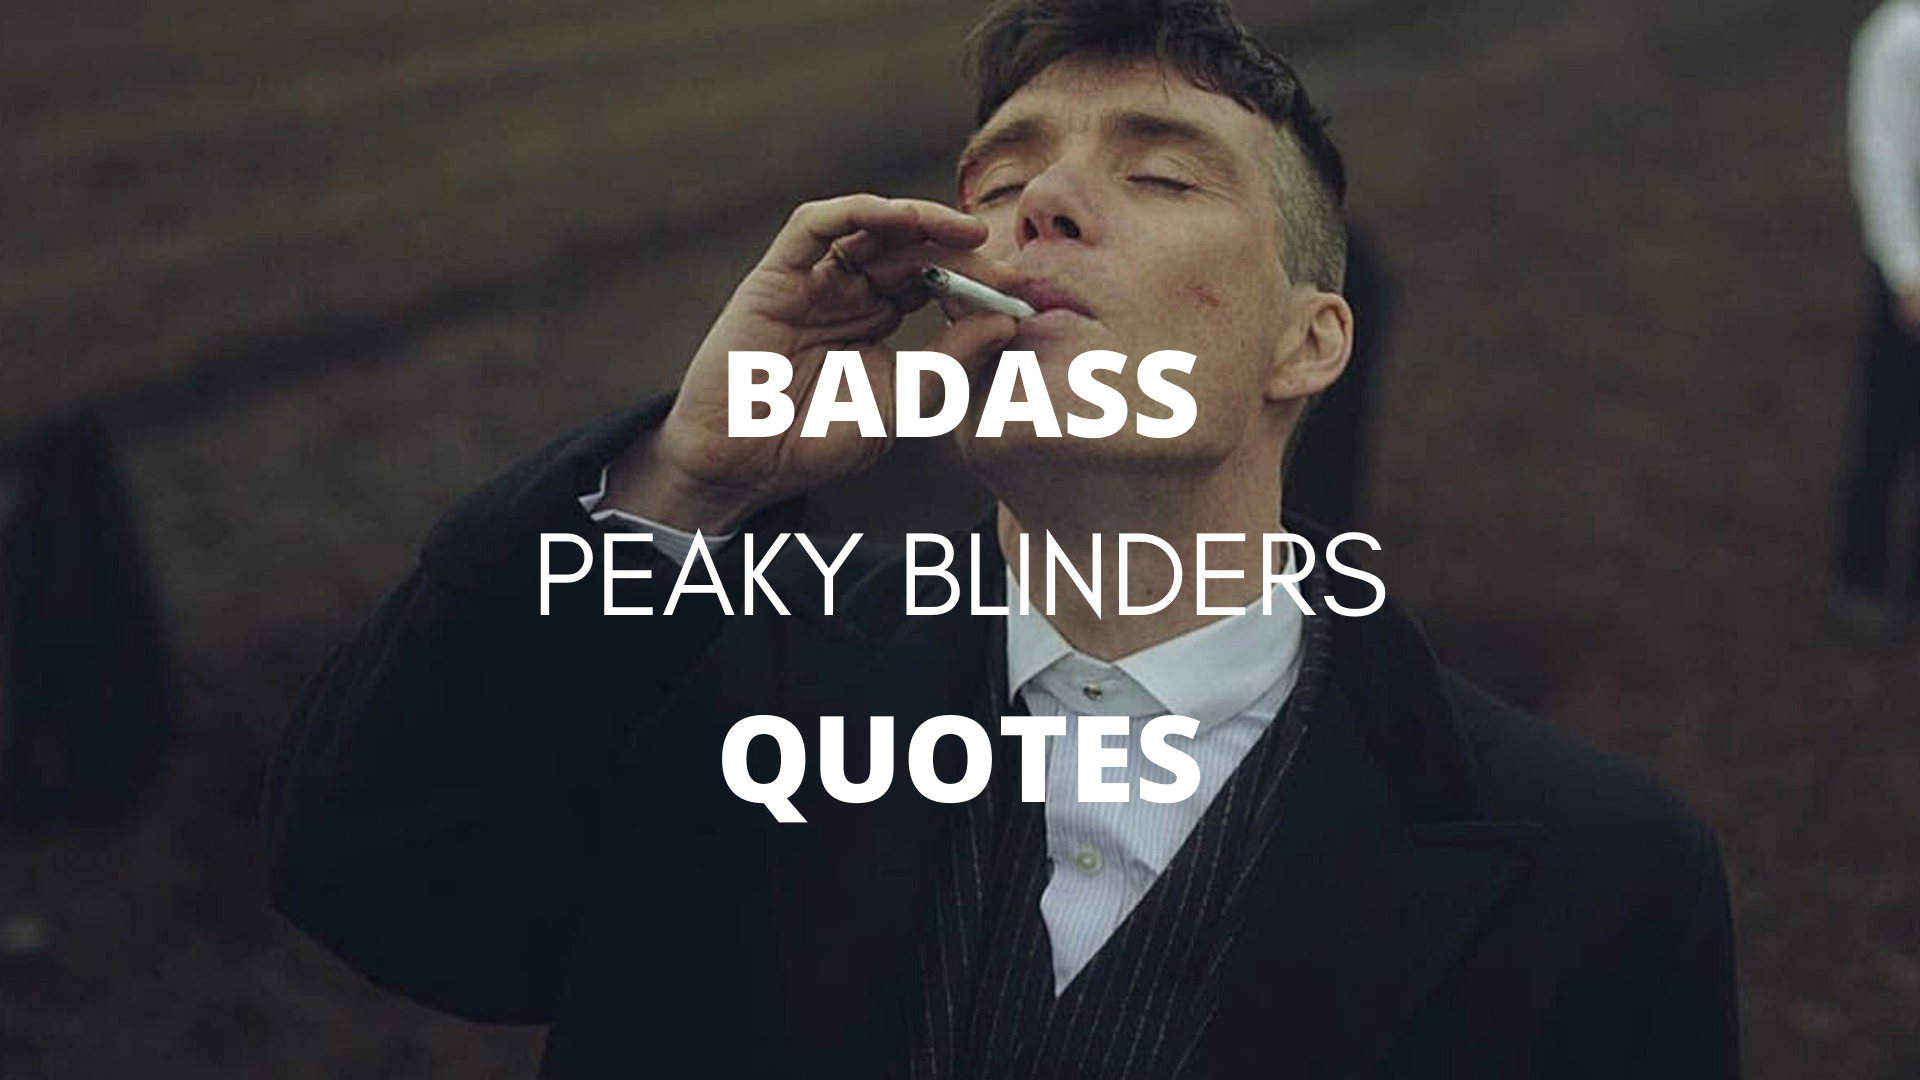 37 Badass Peaky Blinders Quotes With Images All Time Favourite 